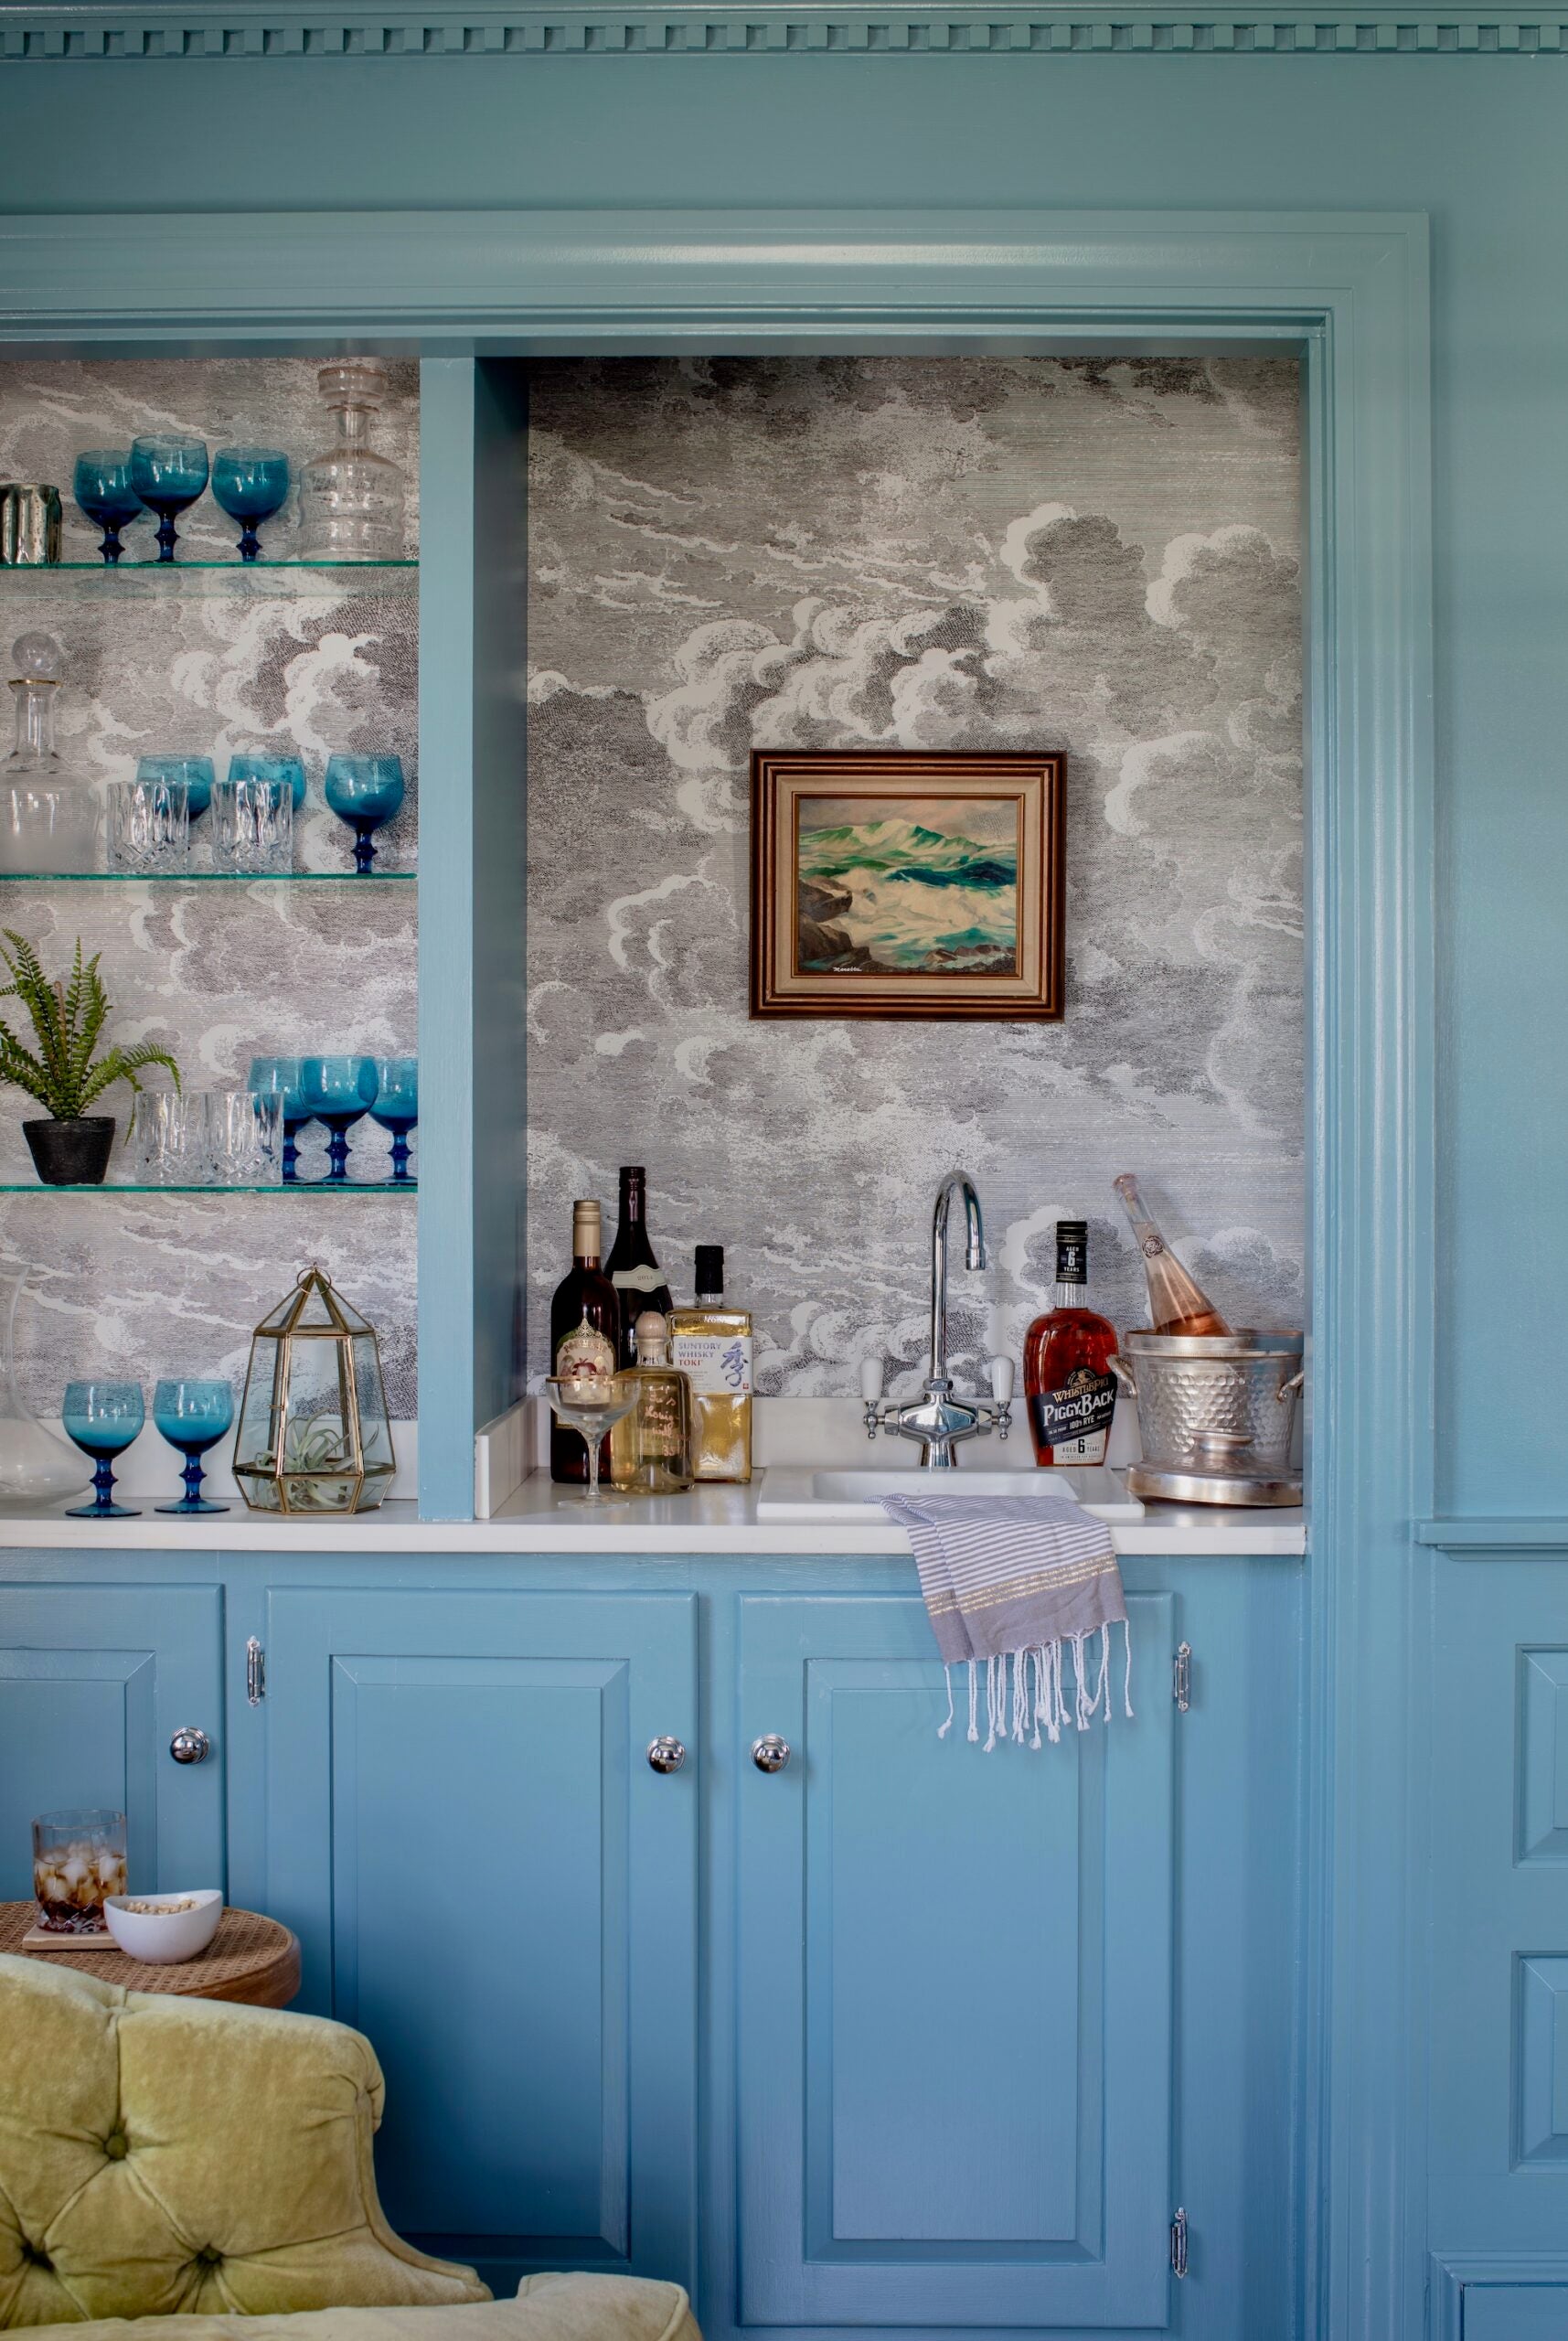 Light blue cabinetry makes up the bar in this space and matches the wainscoting and framing of the room. A fringed tea towel sits in a small sink with a metal faucet. An olive green armchair is in the foreground next to a small round end table with a bowl and a full glass with ice on it. There are blue glasses on the glass open shelves of the bar. The backsplash is a wallpaper with a gray cloud print. There are bottles of liquor and an ice bucket with a bottle in it on the counter.